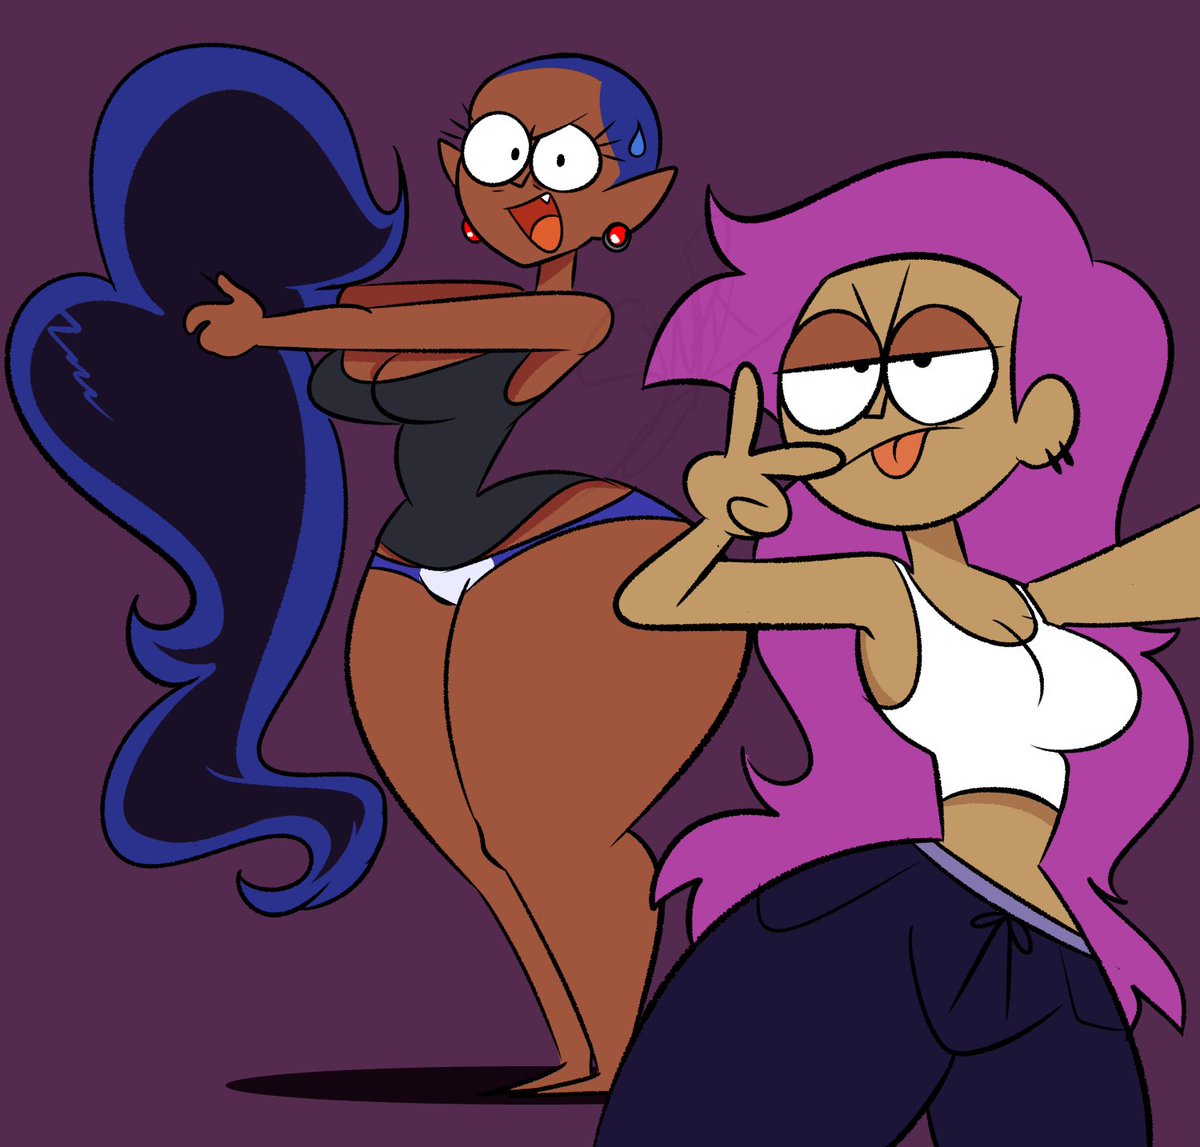 Dont worry enid got revenge in the end #nsfw #rule34 #hentai.